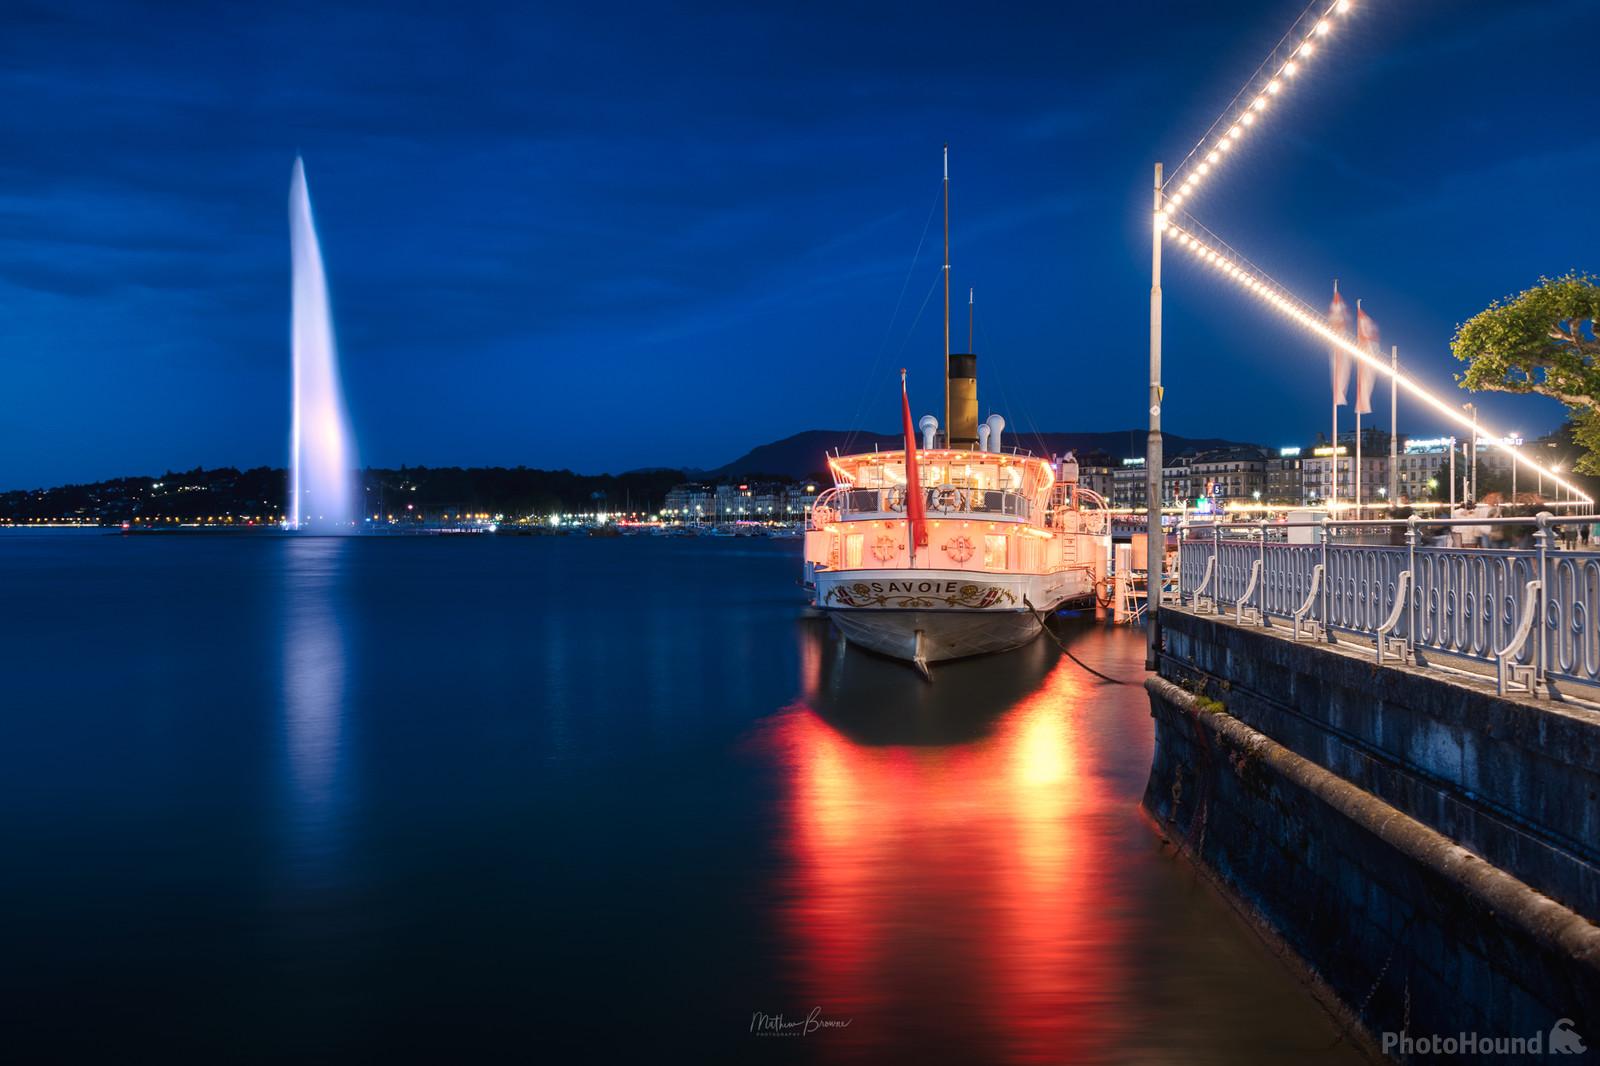 Image of Jardin-anglais CGN (Ferry Boat Dock) by Mathew Browne